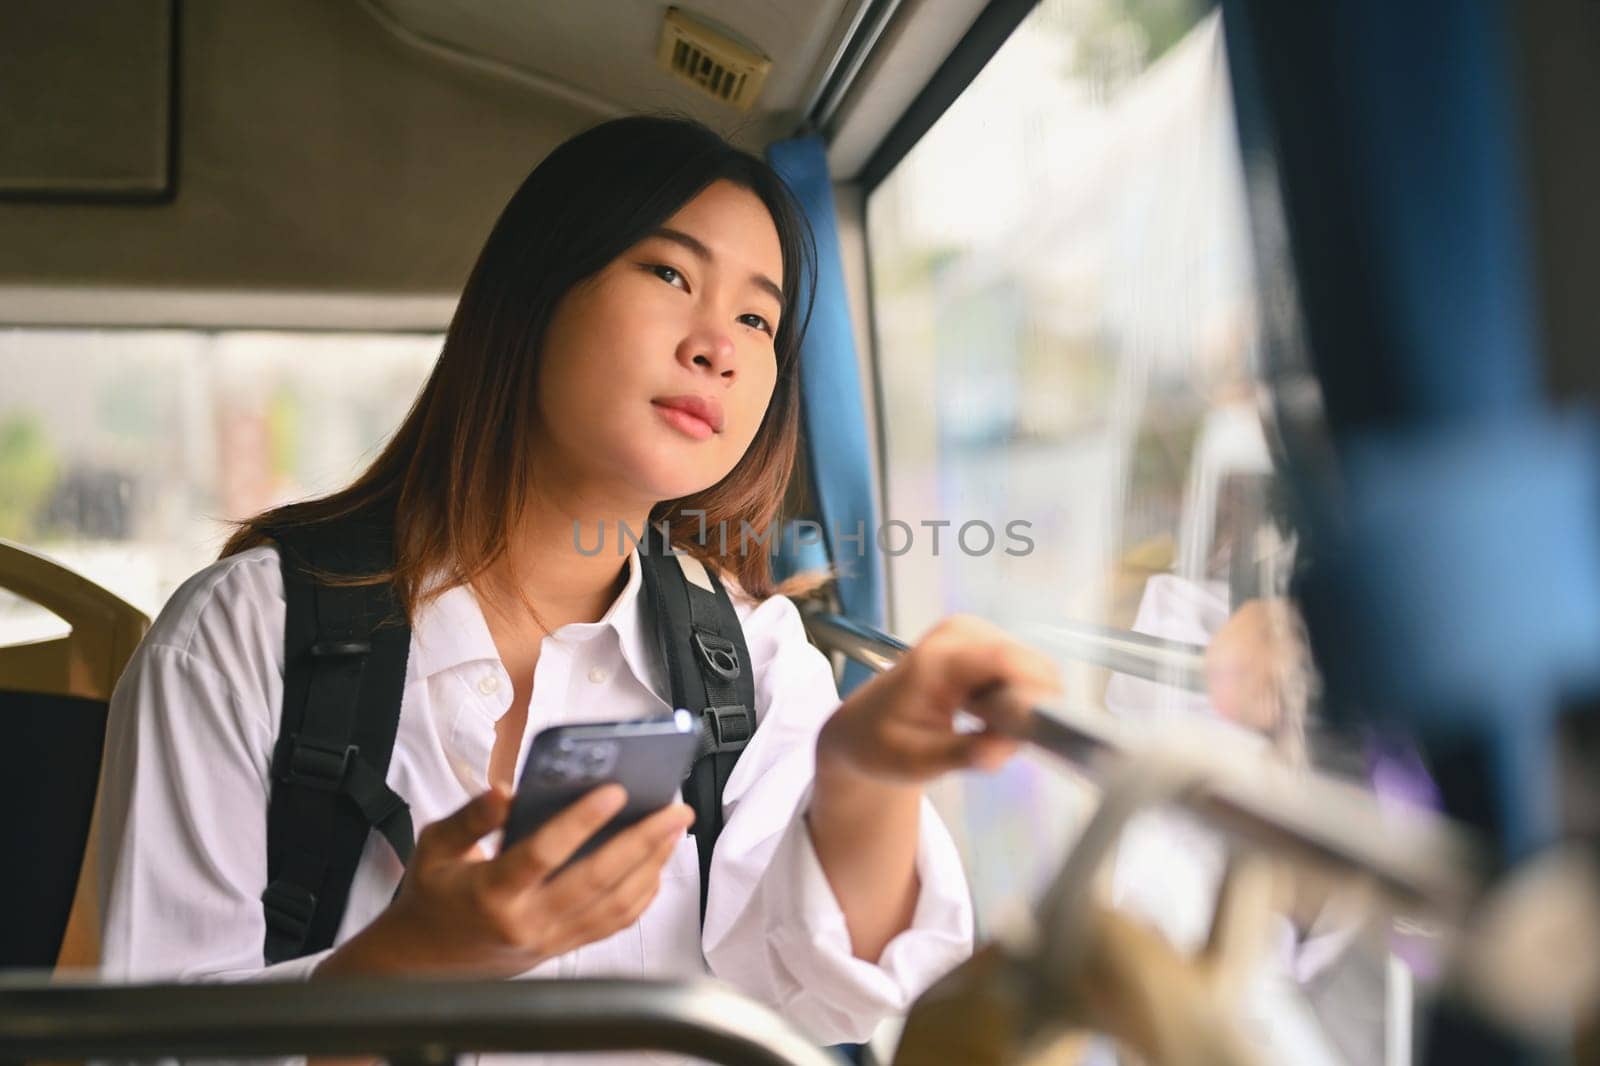 Pretty young woman sitting inside public bus and looking through the window.